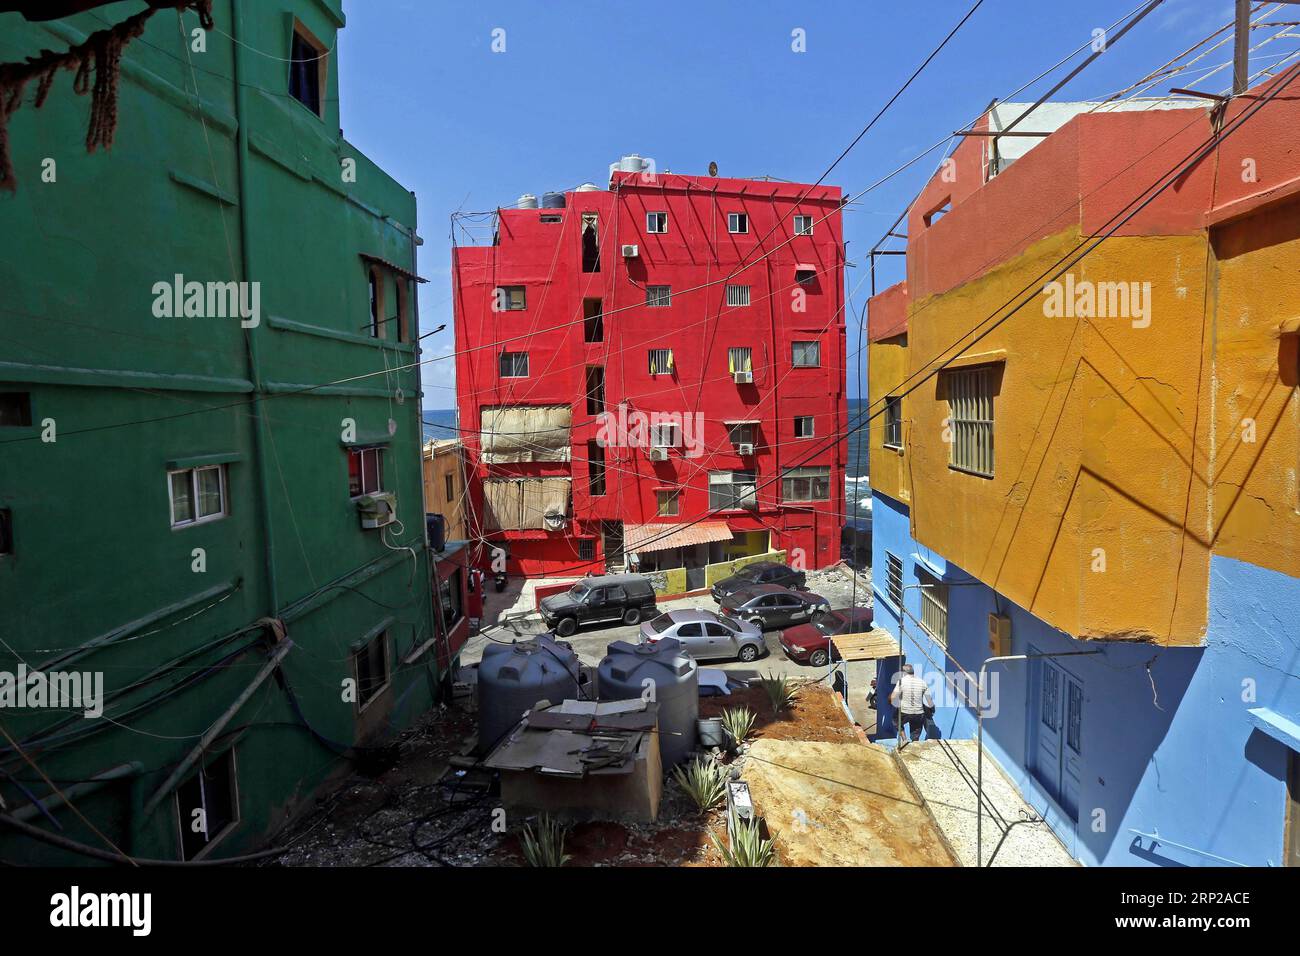 (180827) -- OUZAI, Aug. 27, 2018 -- Buildings with colorful paintings are seen on the beach in Ouzai, south of Beirut, Lebanon, on Aug. 26, 2018. ) (jmmn) LEBANON-OUZAI-BUILDINGS BilalxJawich PUBLICATIONxNOTxINxCHN Stock Photo